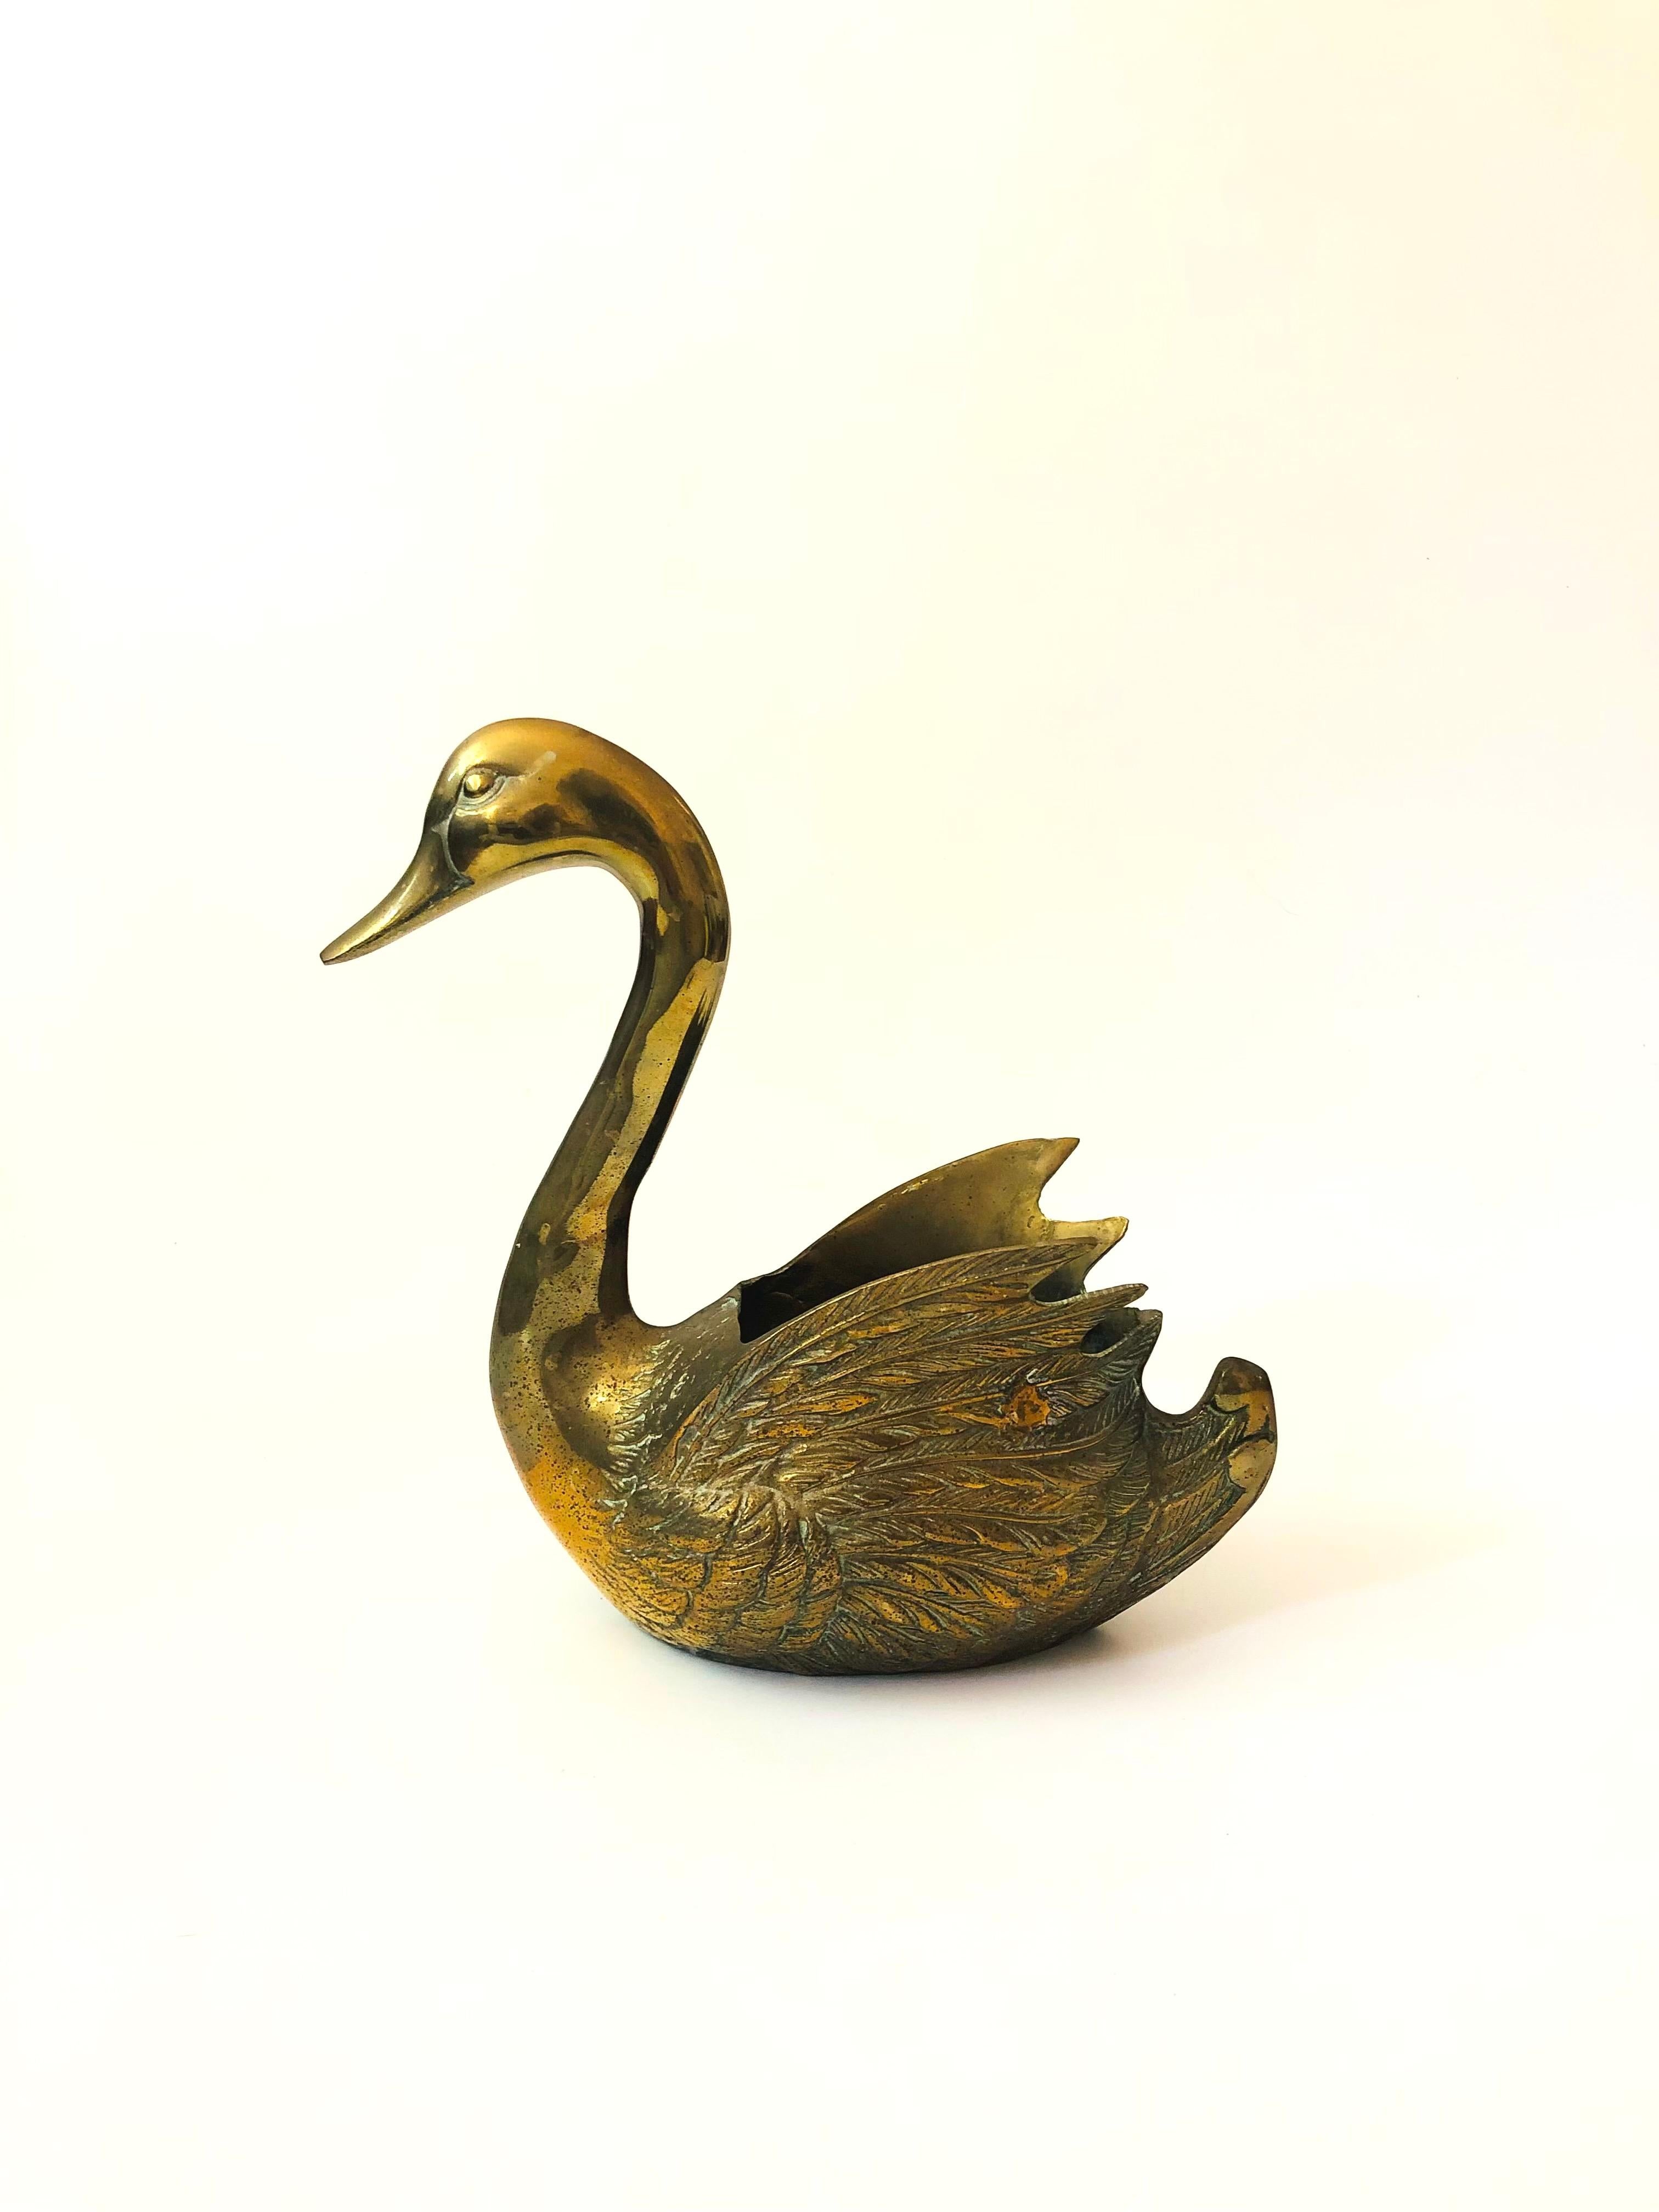 A vintage brass planter in the shape of a swan. Lovely graceful shape with beautiful detailing to the feathers formed into the brass.

